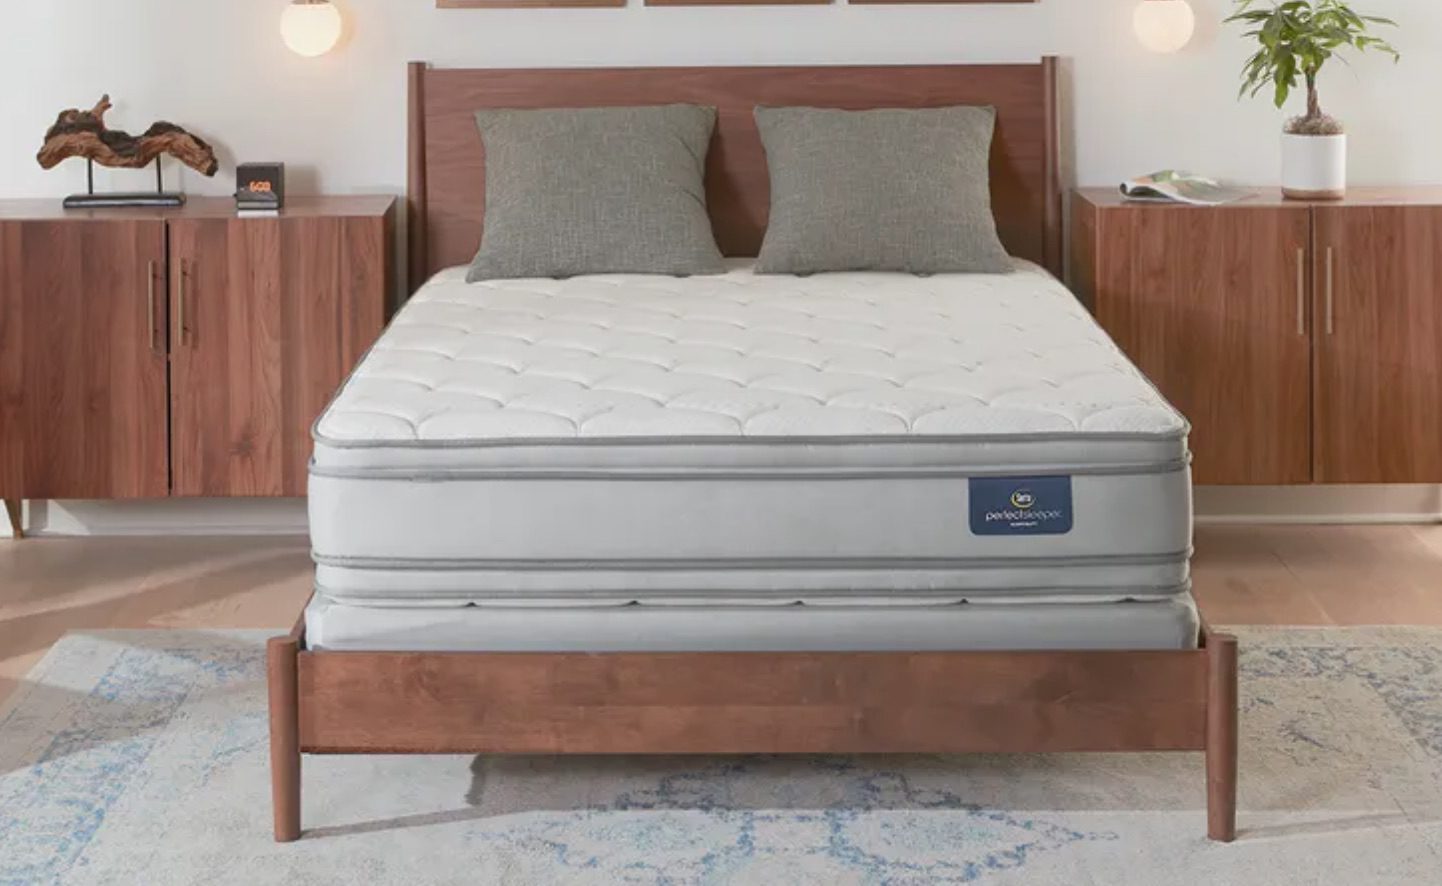 Product page photo of the Serta Perfect Sleeper Hotel Signature Suite Euro Top